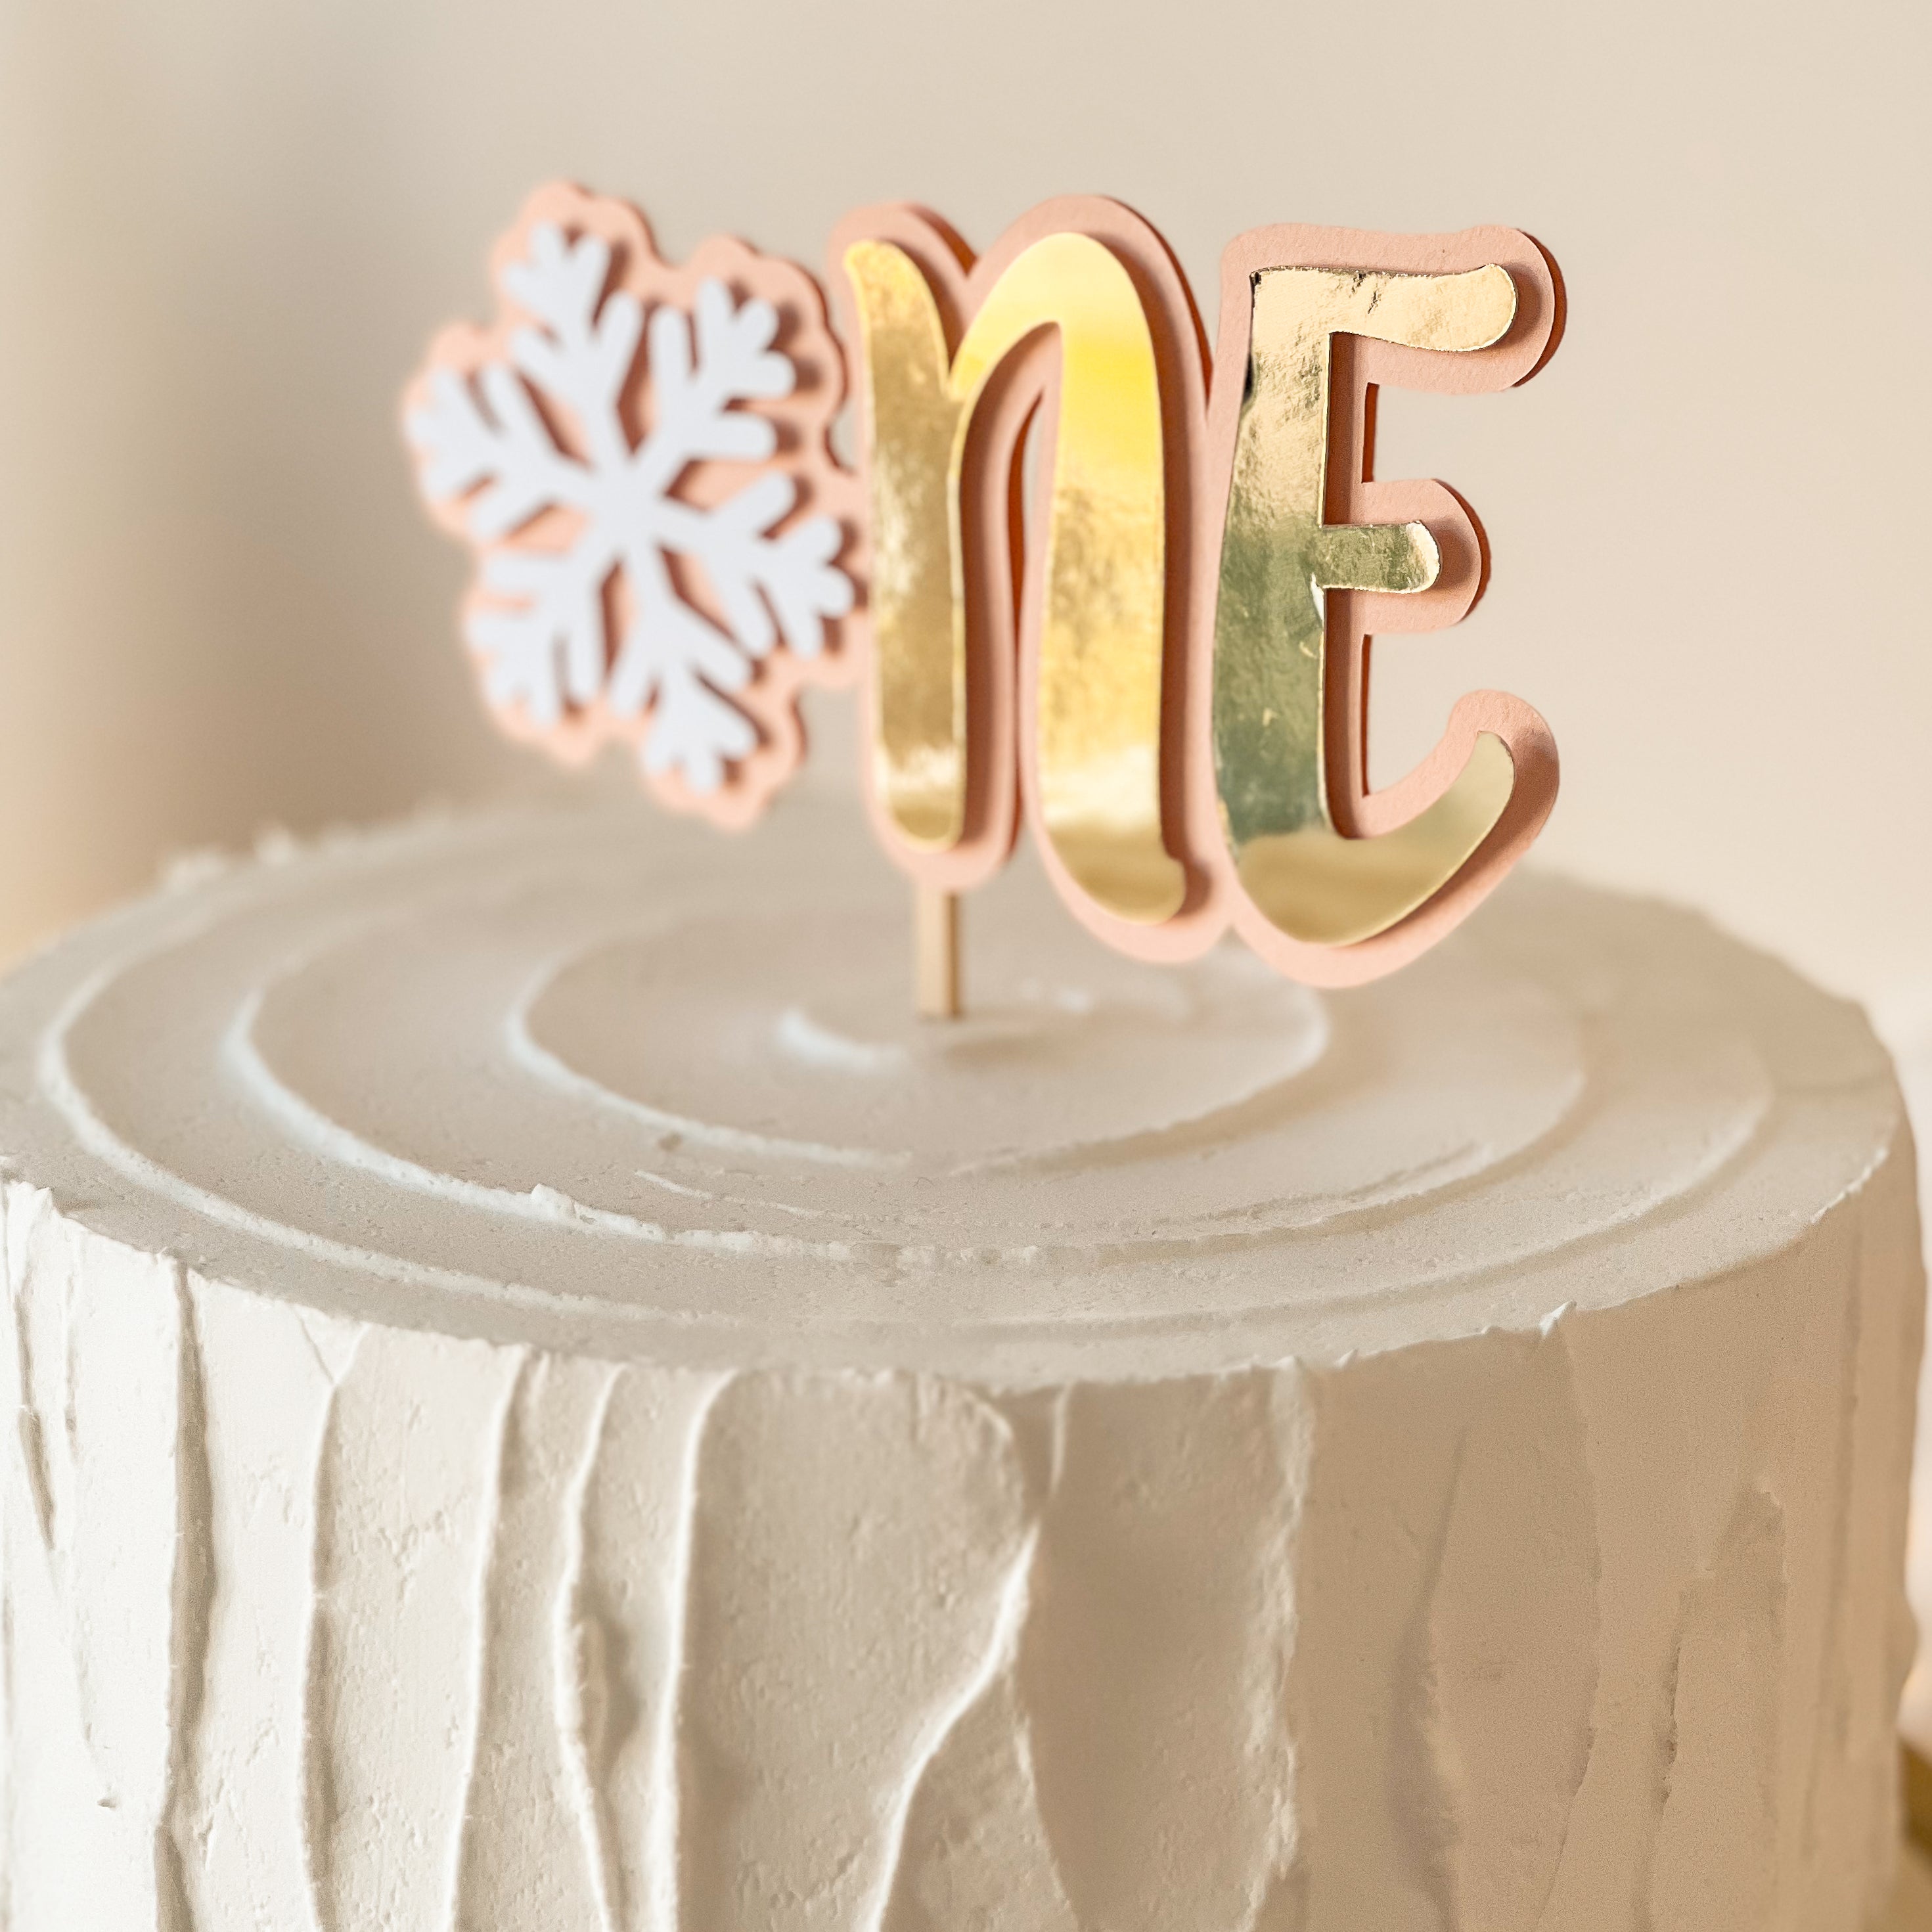 Winter Onederland Cake Topper Christmas Holiday Birthday Winter Baby Shower Winter Onederland Oh What Fun it is to be One party